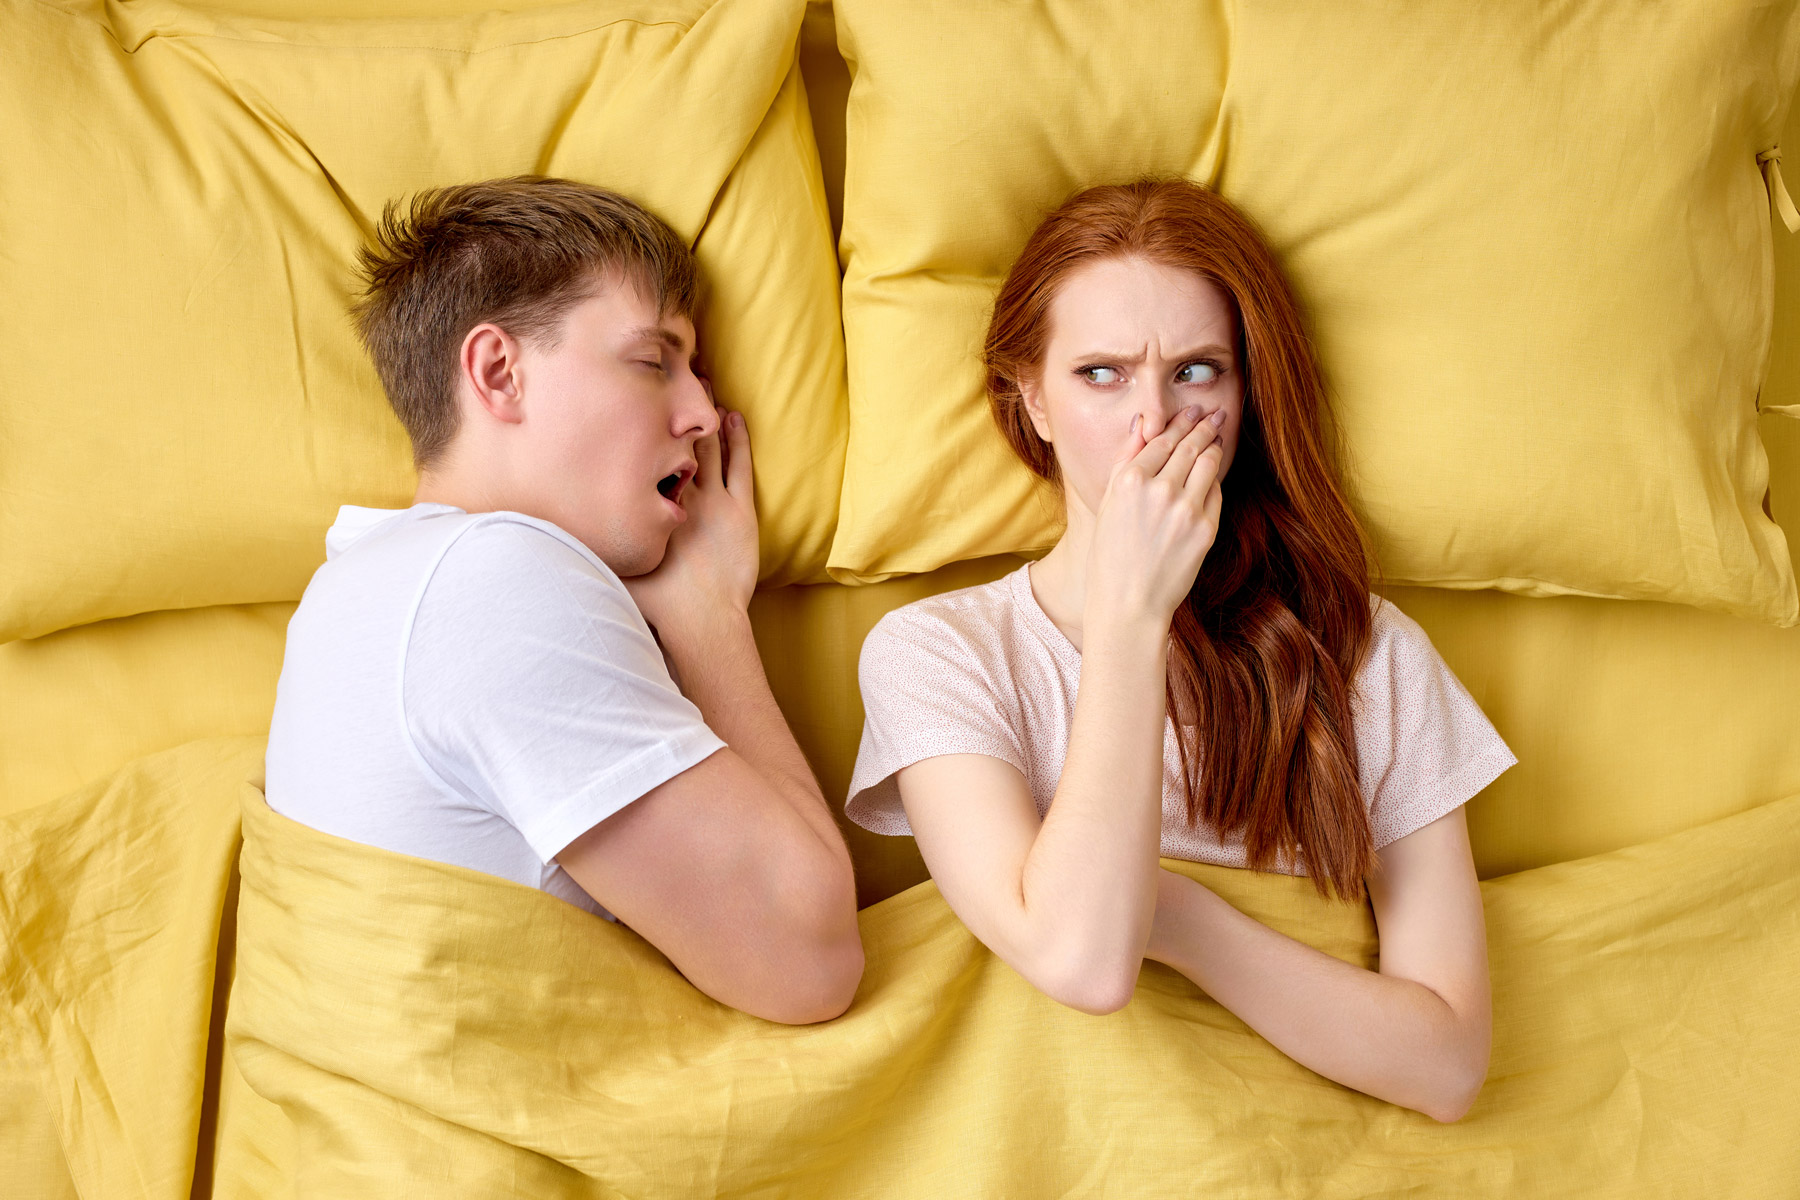 young woman bothered by bad breath of her husband in bed